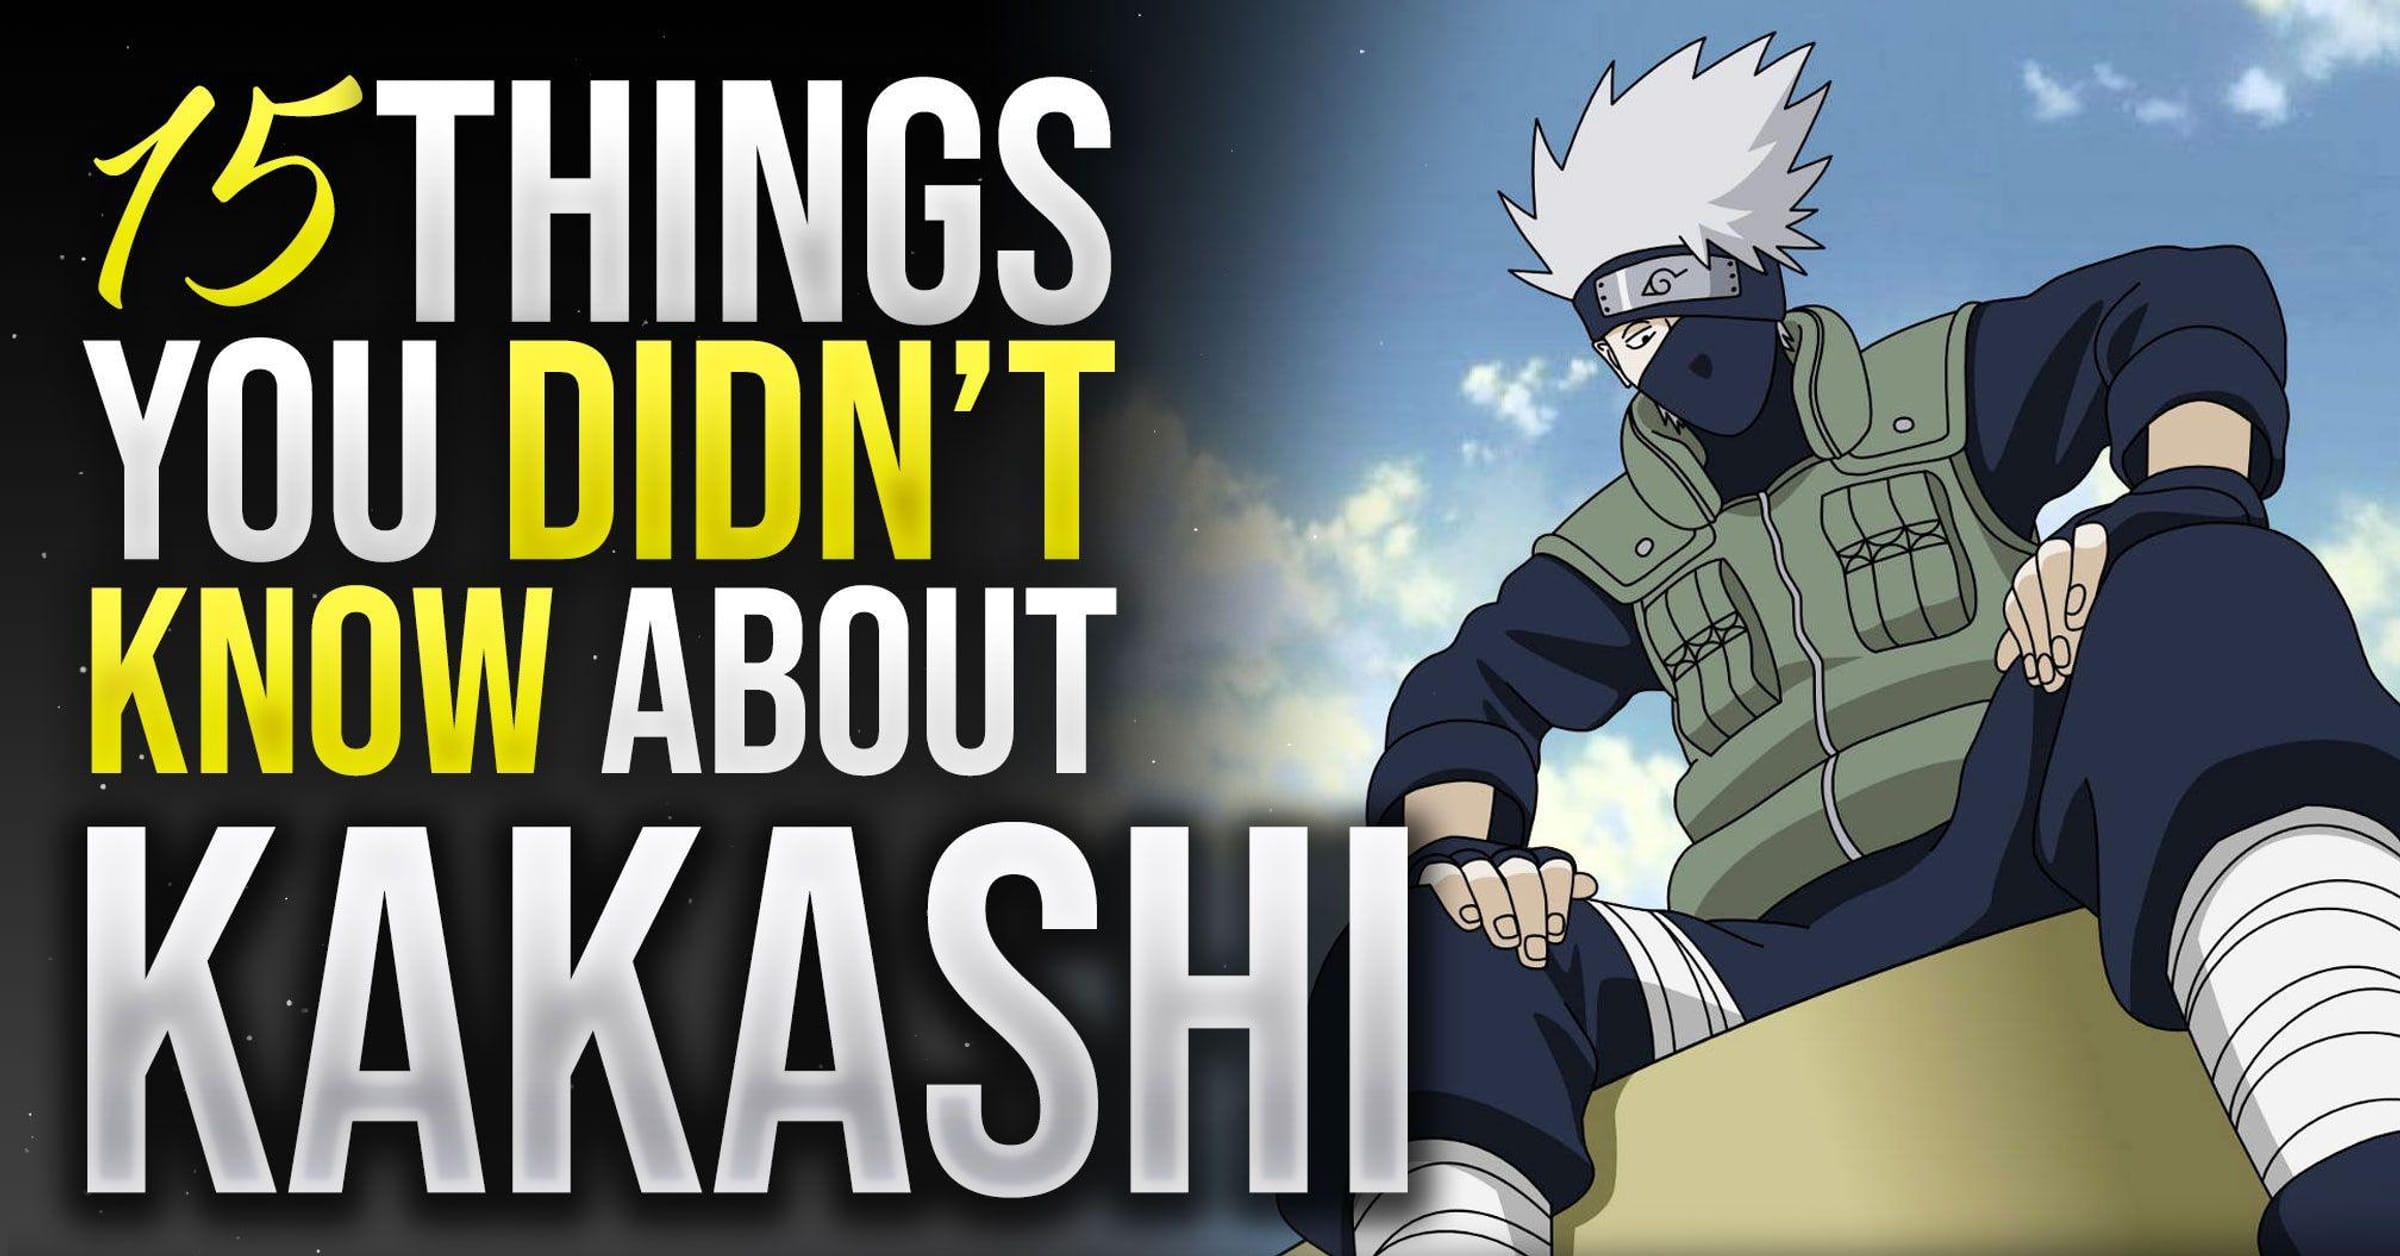 Why Does Kakashi Always Wear a Mask in 'Naruto' and Is His Face Ever Shown?